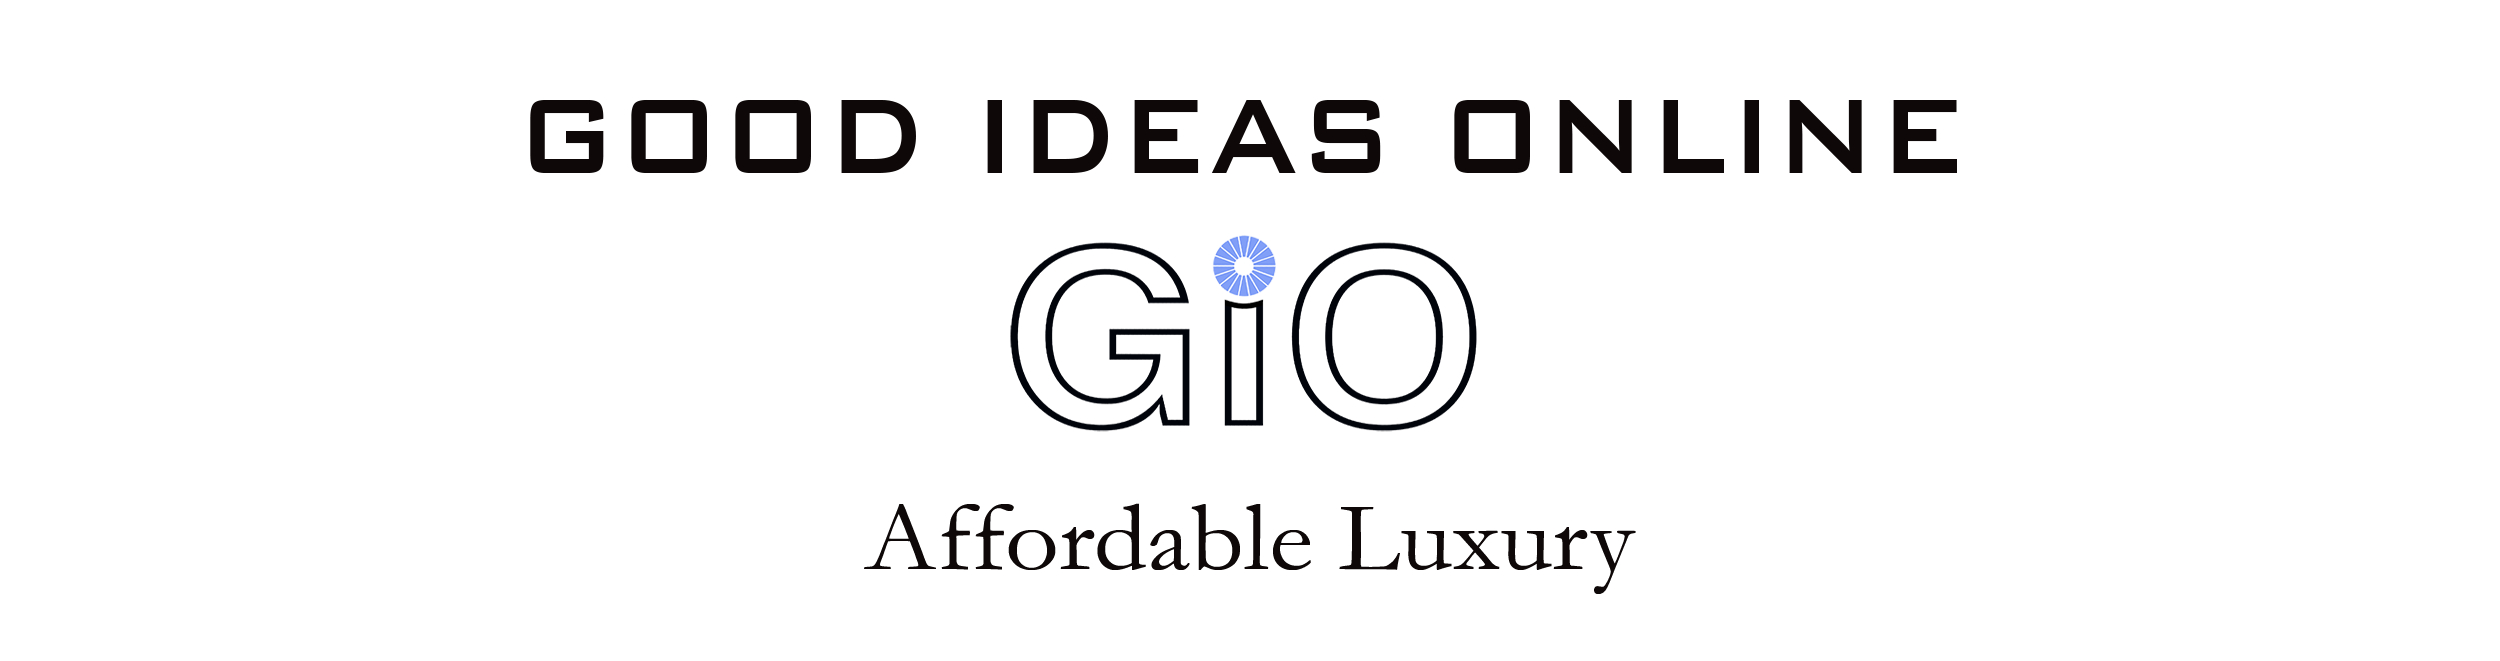 GOOD IDEAS ONLINE (GiO)|Online Shopping Store